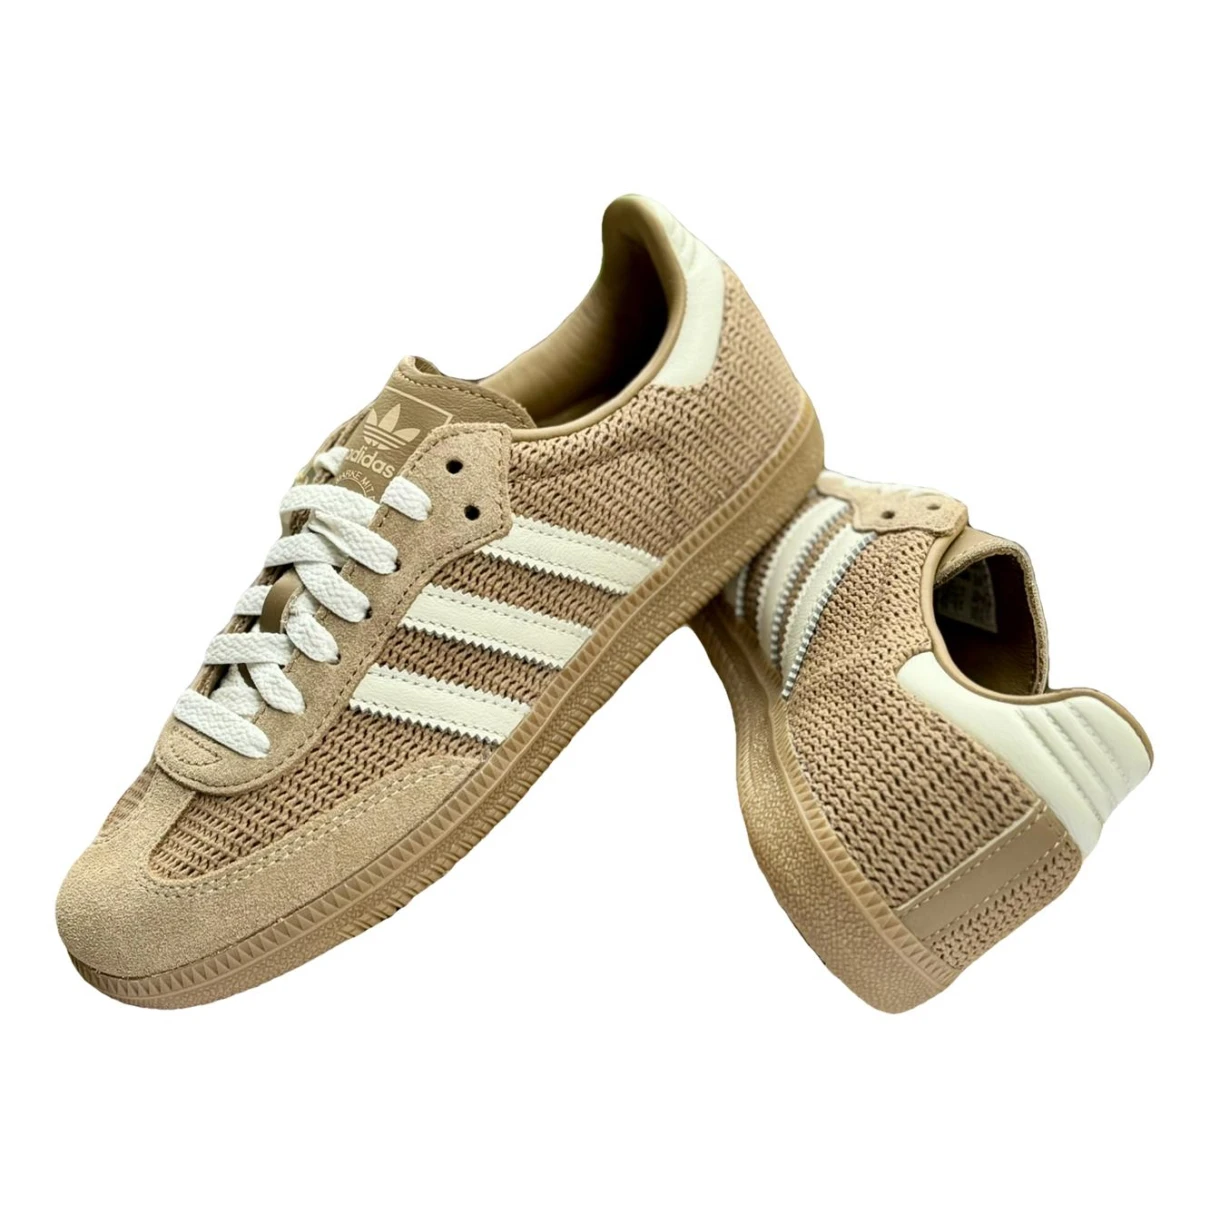 Pre-owned Adidas Originals Samba Leather Trainers In Brown